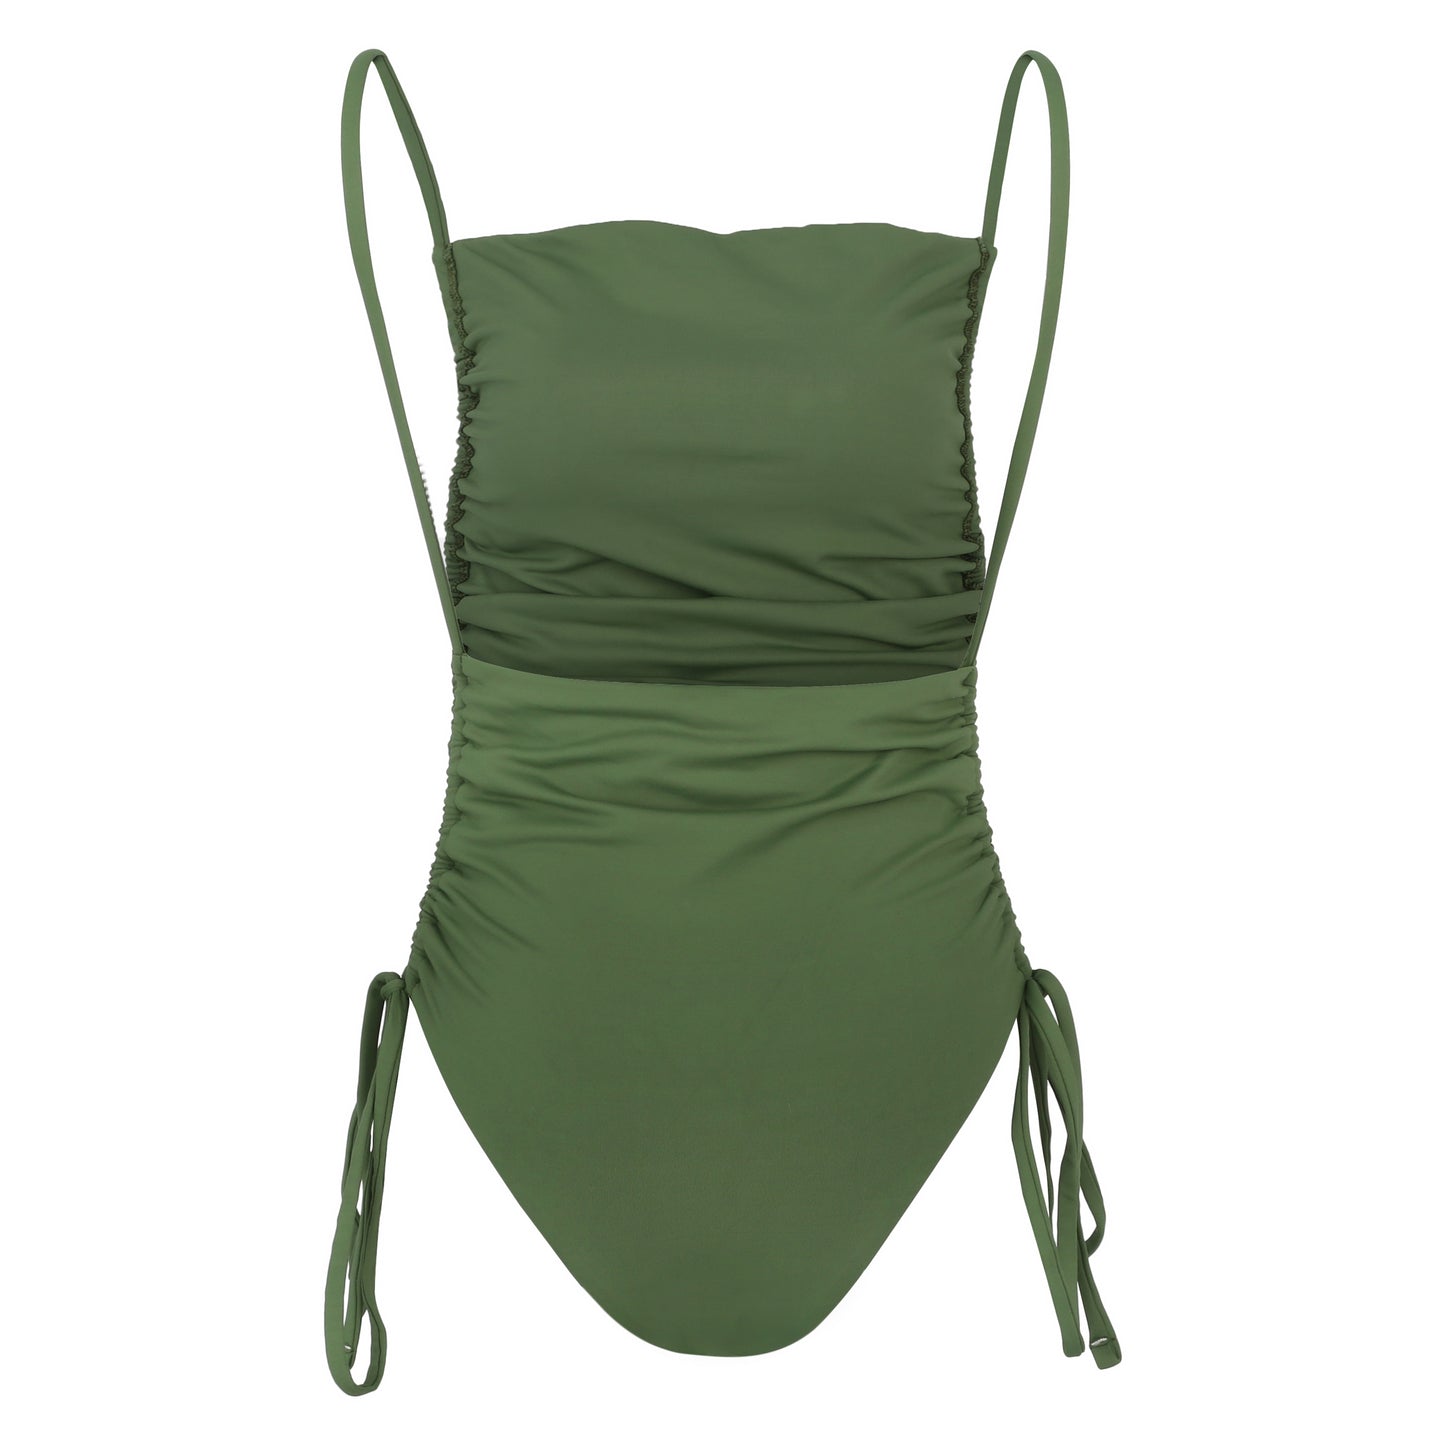 The Lux One Piece Olive